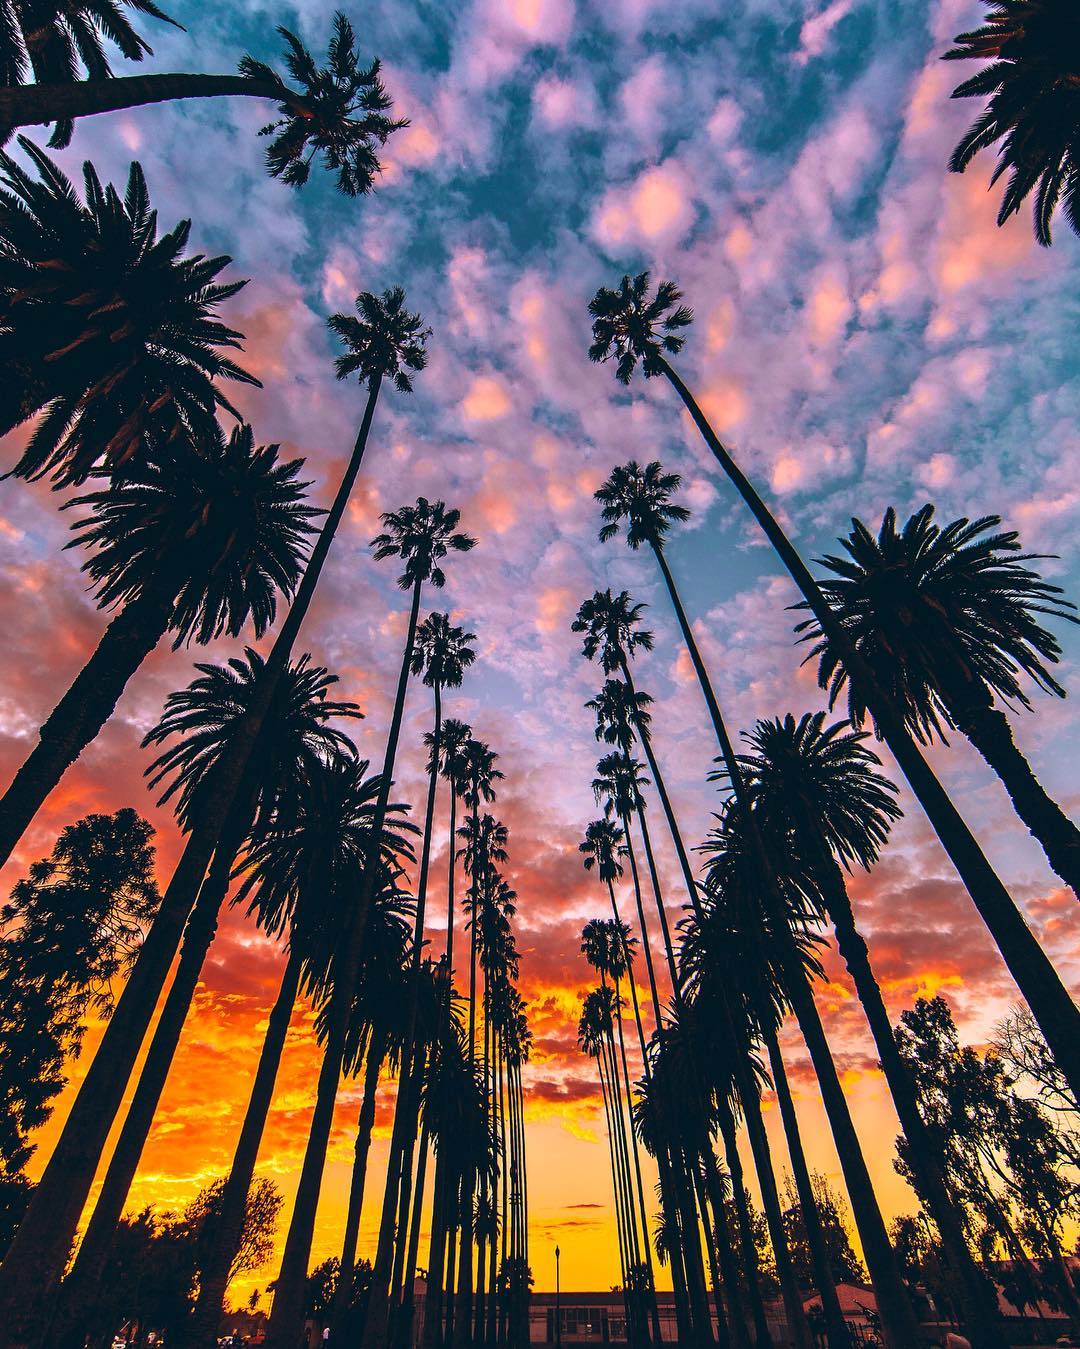 A beautiful sunset with palm trees in the foreground. - California